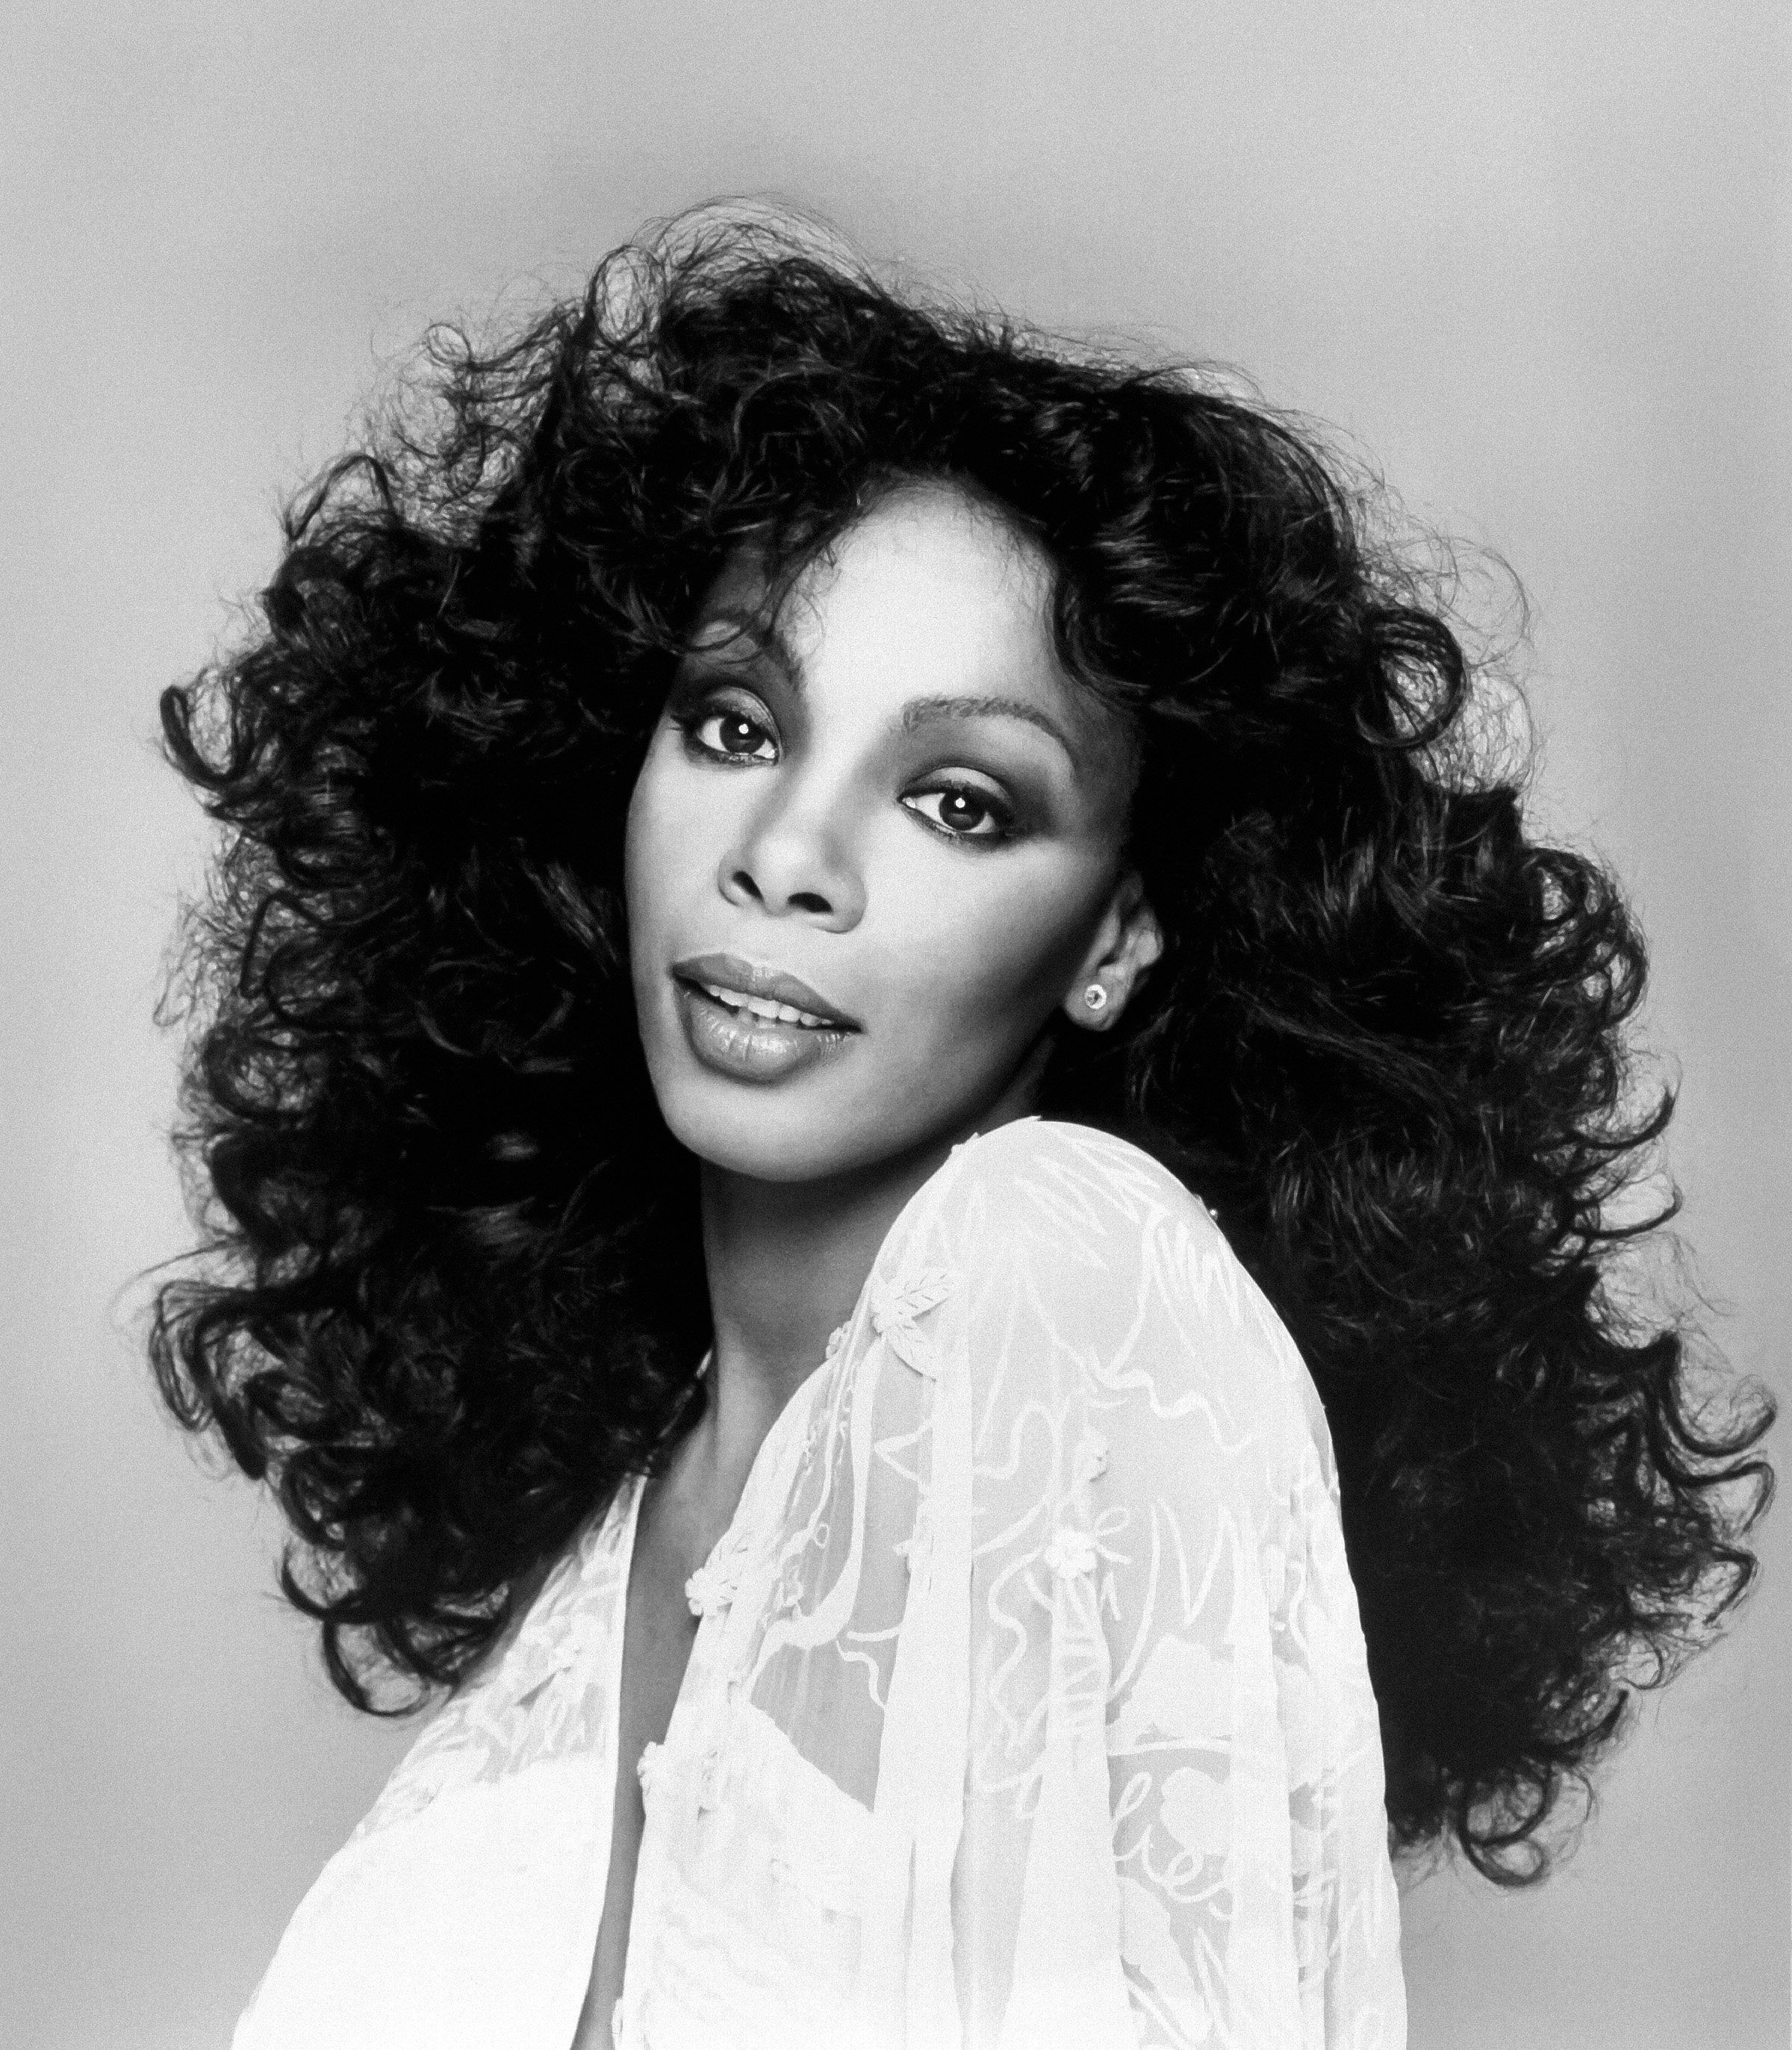 Summer in a 1977 publicity photo for ''[[Once Upon a Time (Donna Summer album)|Once Upon a Time]]''